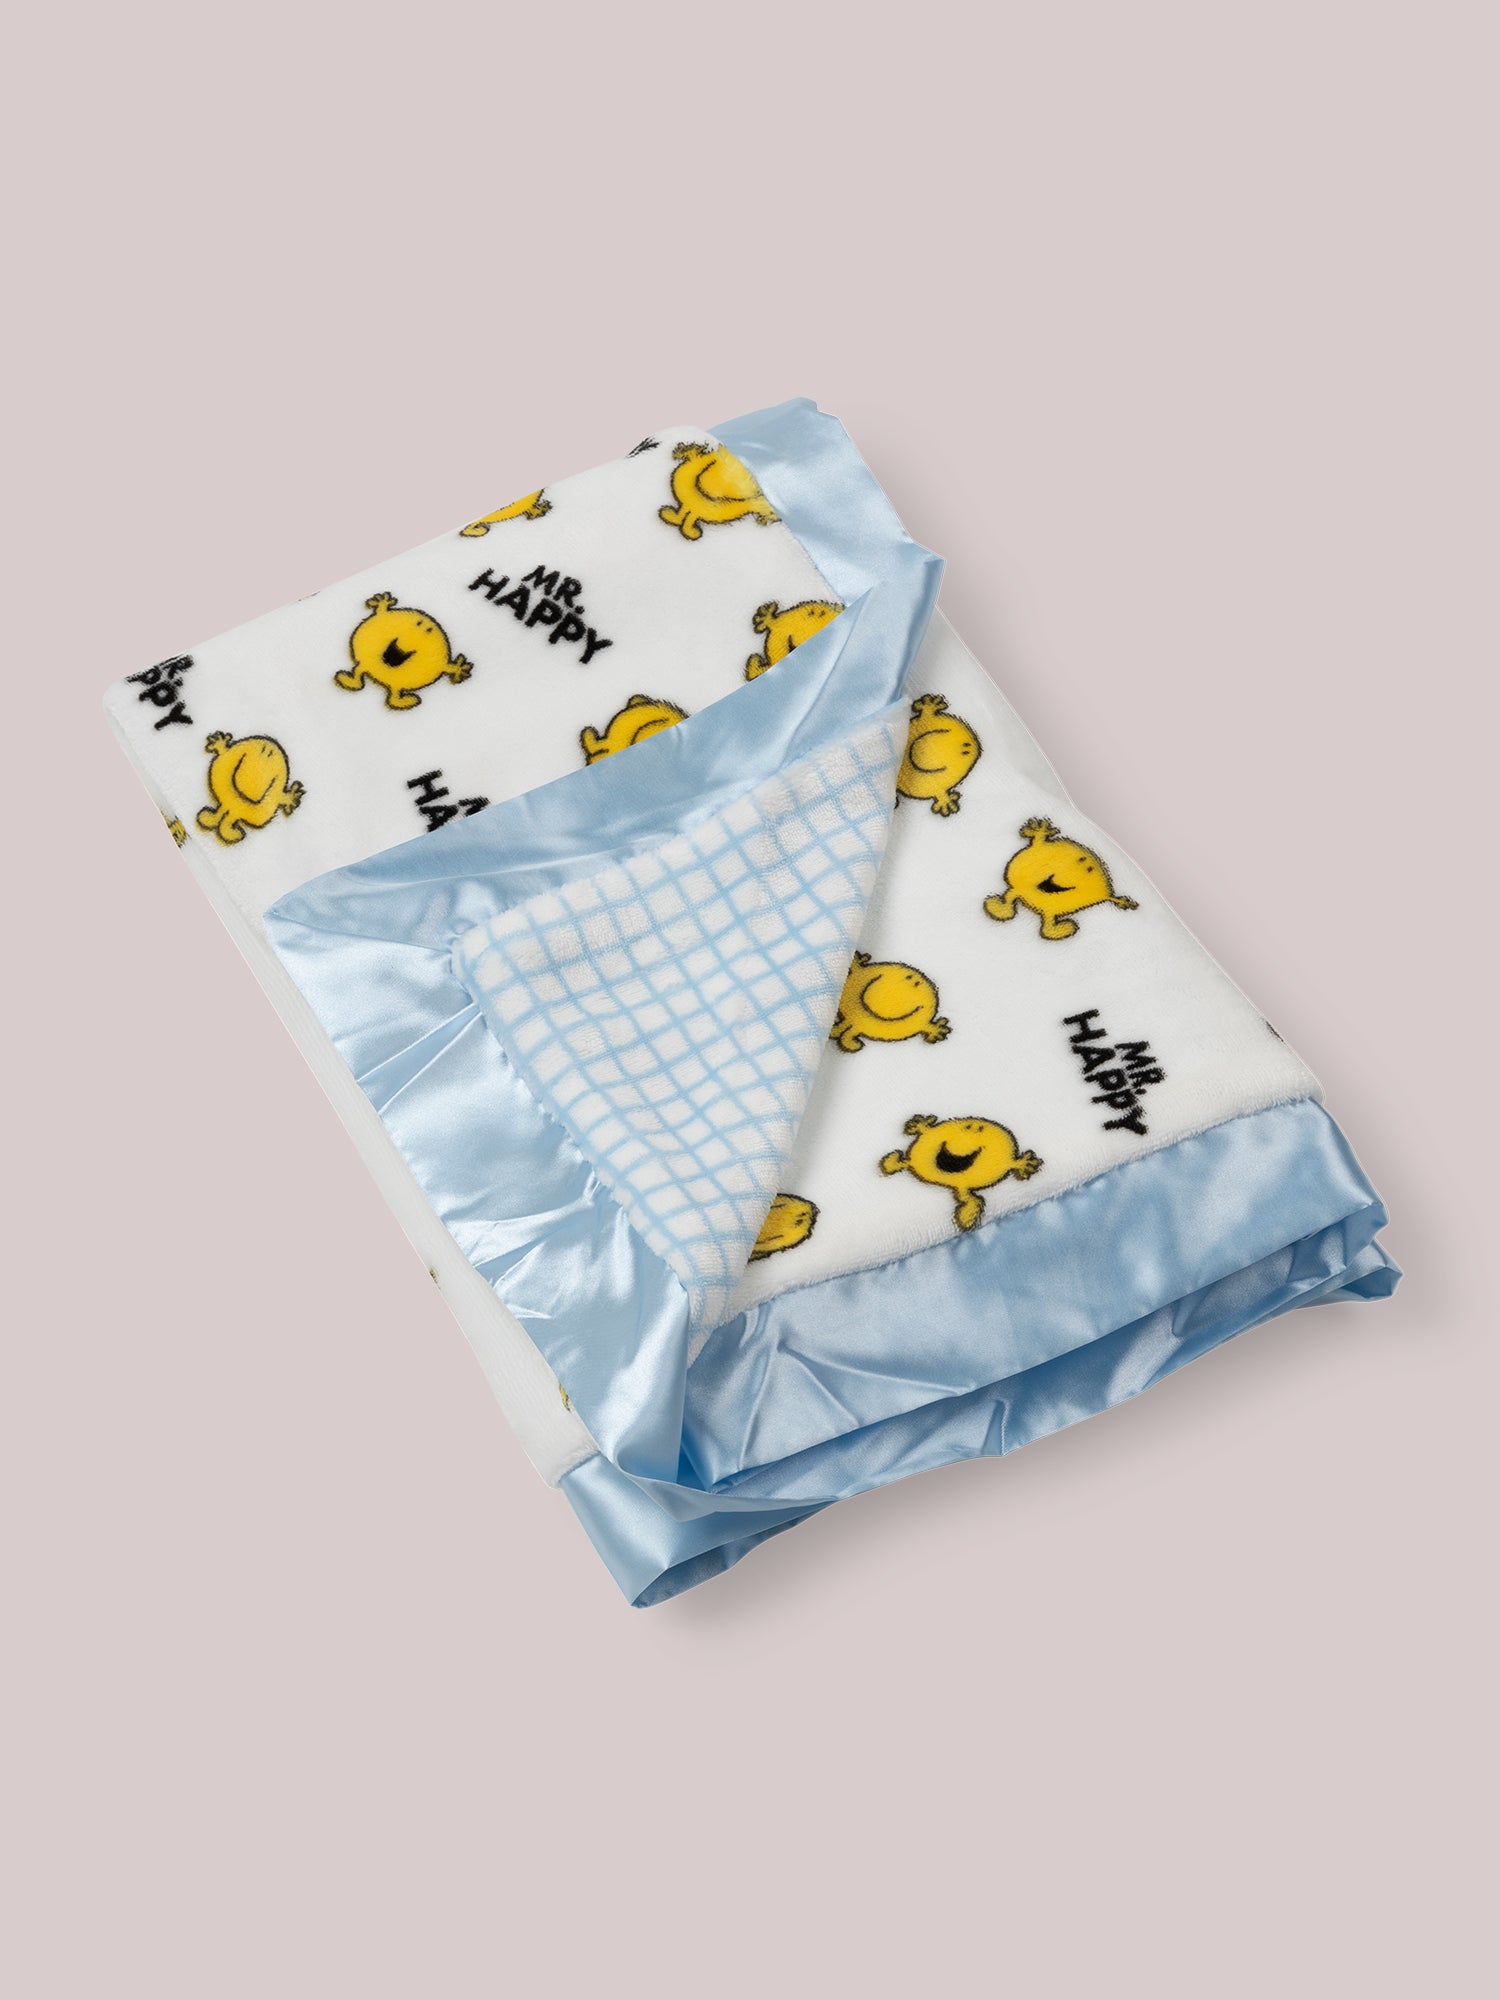 Mr. Happy Reversible Blanket folded with reverse side showing